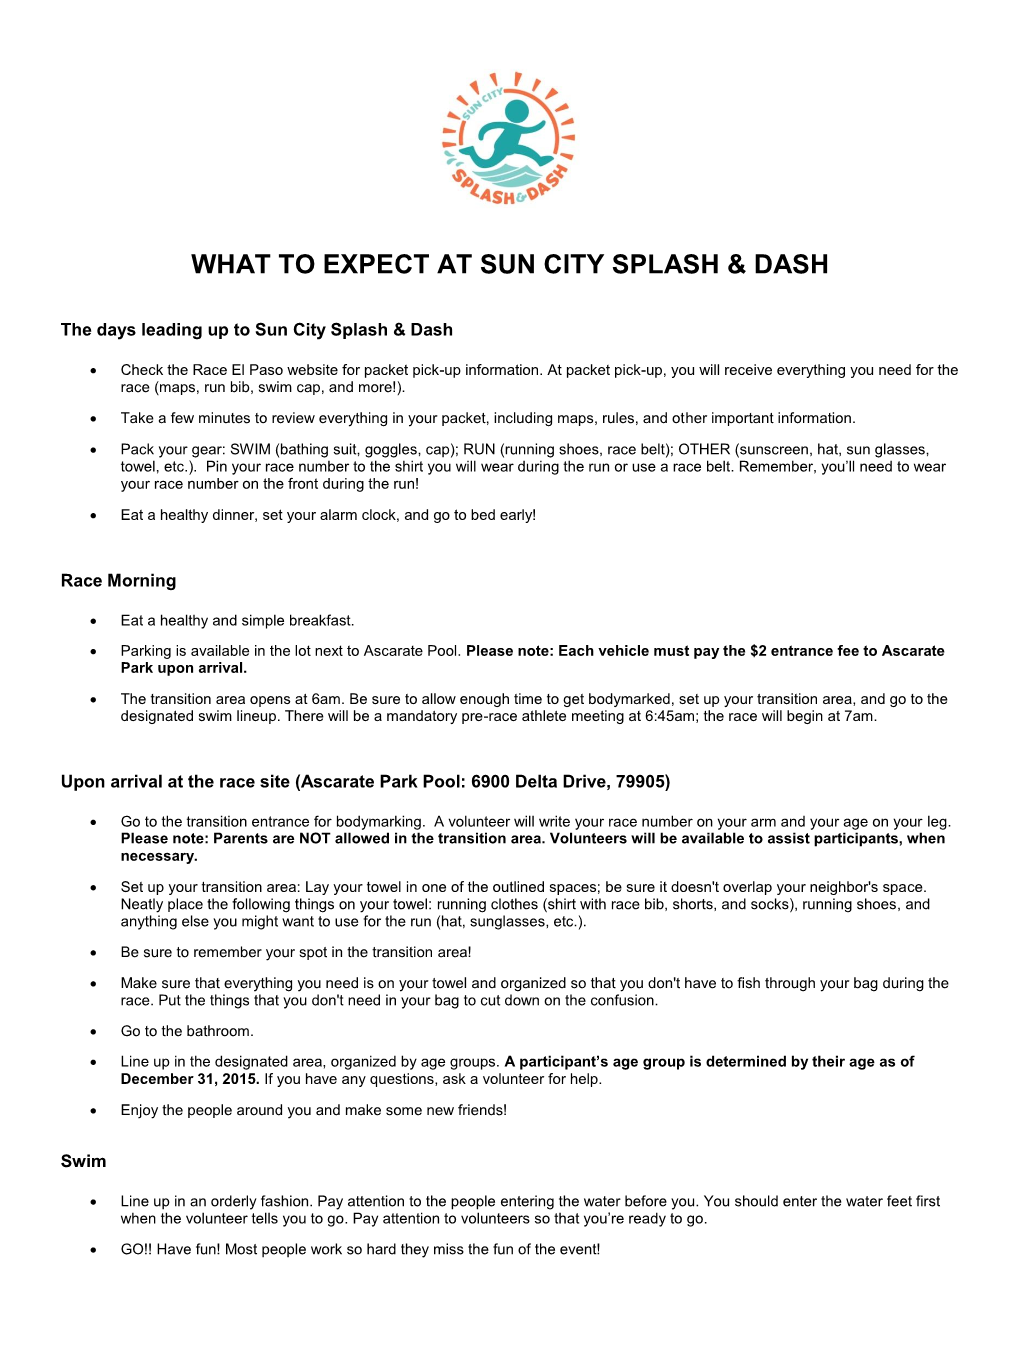 What to Expect at Sun City Splash & Dash